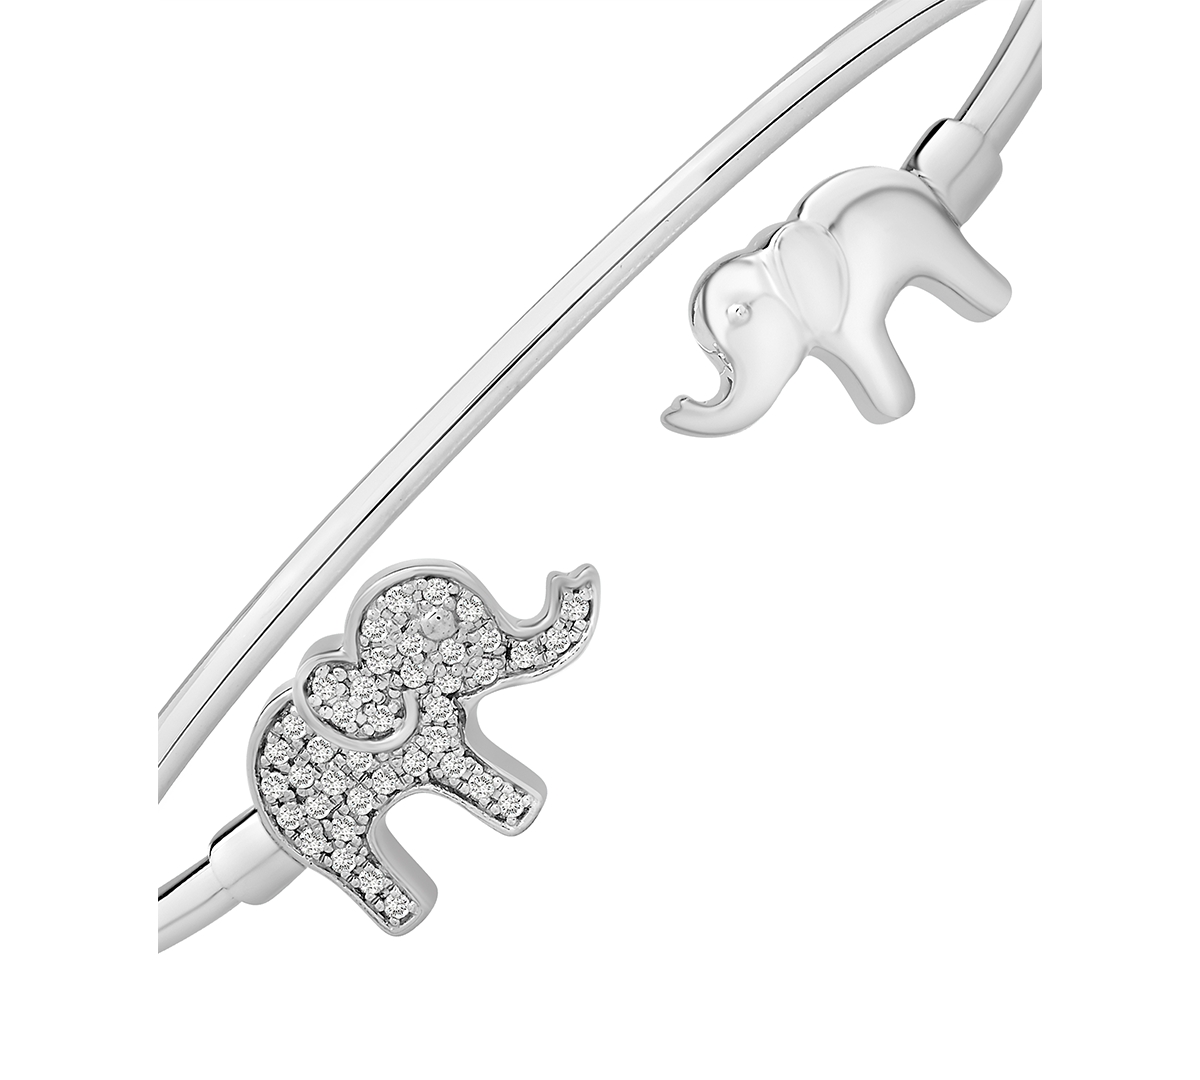 Diamond Elephant Cuff Bangle Bracelet (1/4 ct. t.w.) in Sterling Silver or 14k Gold-Plated Sterling Silver, Created for Macy's - Sterling Silv